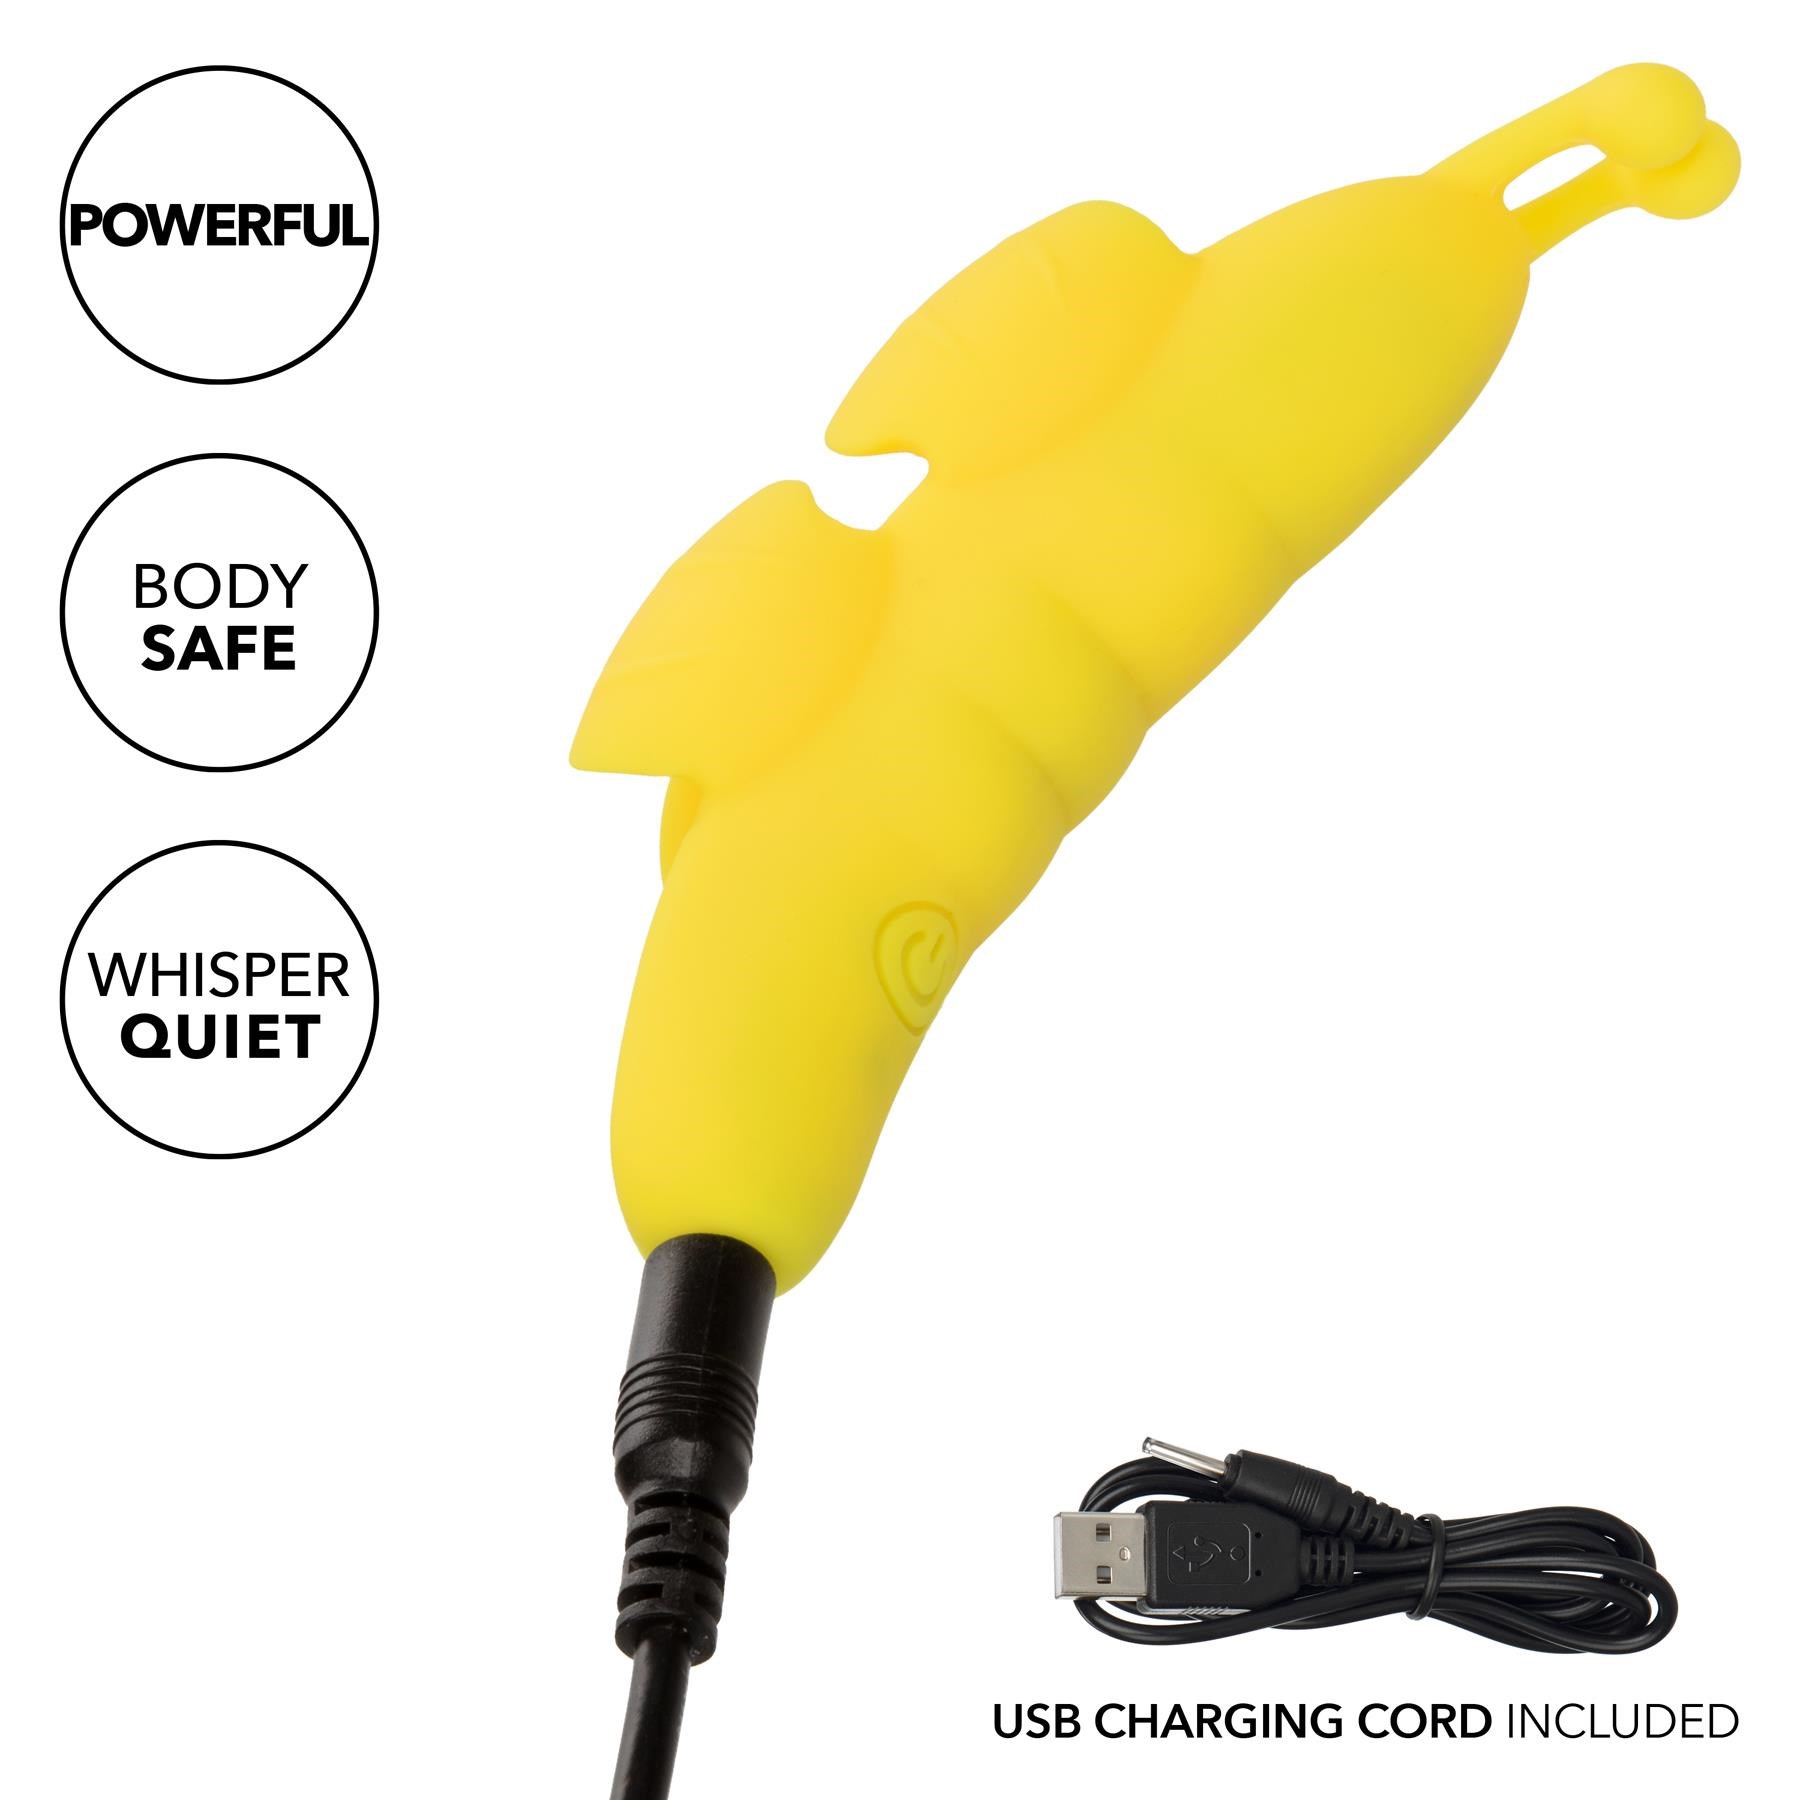 Neon Vibes The Butterfly Finger Vibrator- Showing Where Charging Cable is Placed